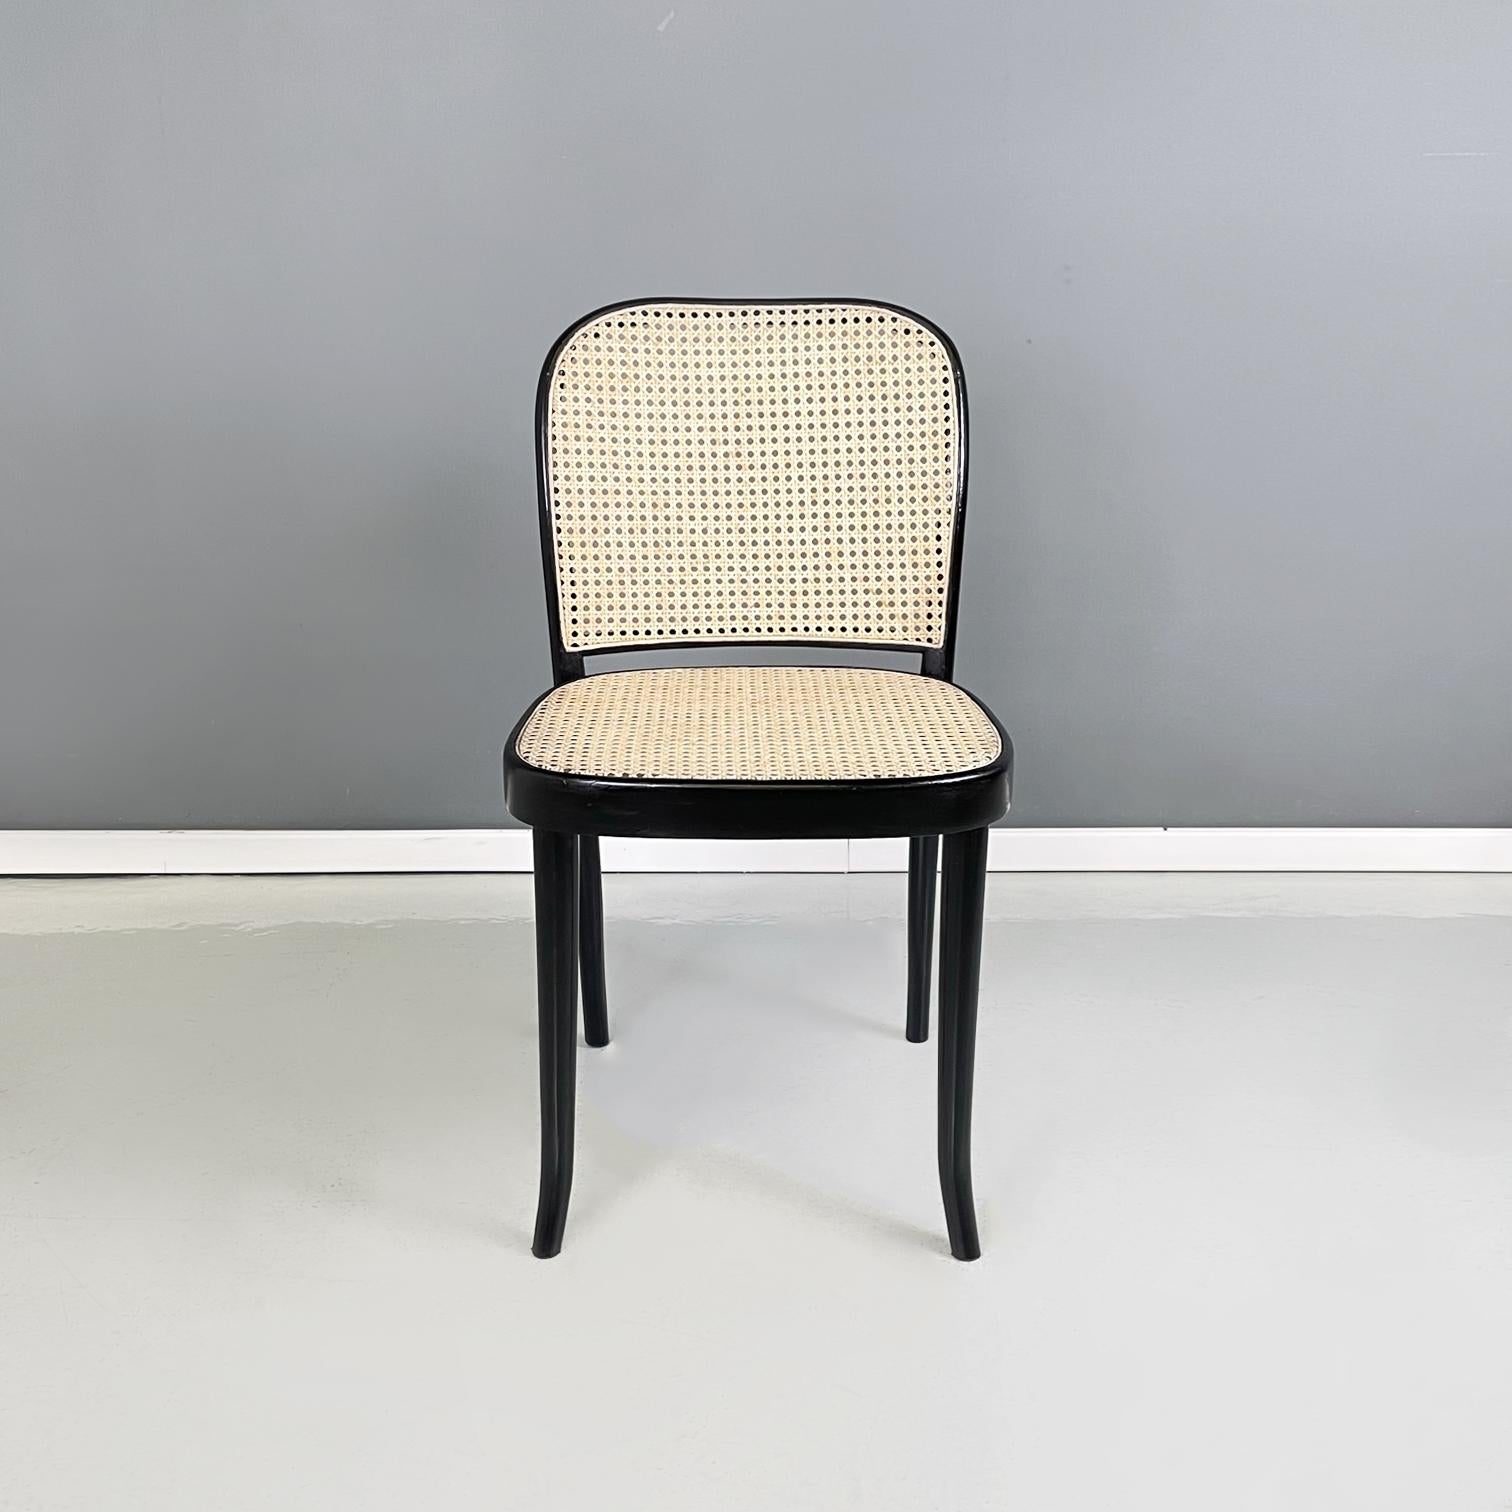 Italian antique Chairs in straw and black wood by Salvatore Leone, early 1900s
Set of 5 chairs with squared seat and back with rounded corners, in black painted wood and straw. The round section legs are in black painted wood.
Produced by Salvatore